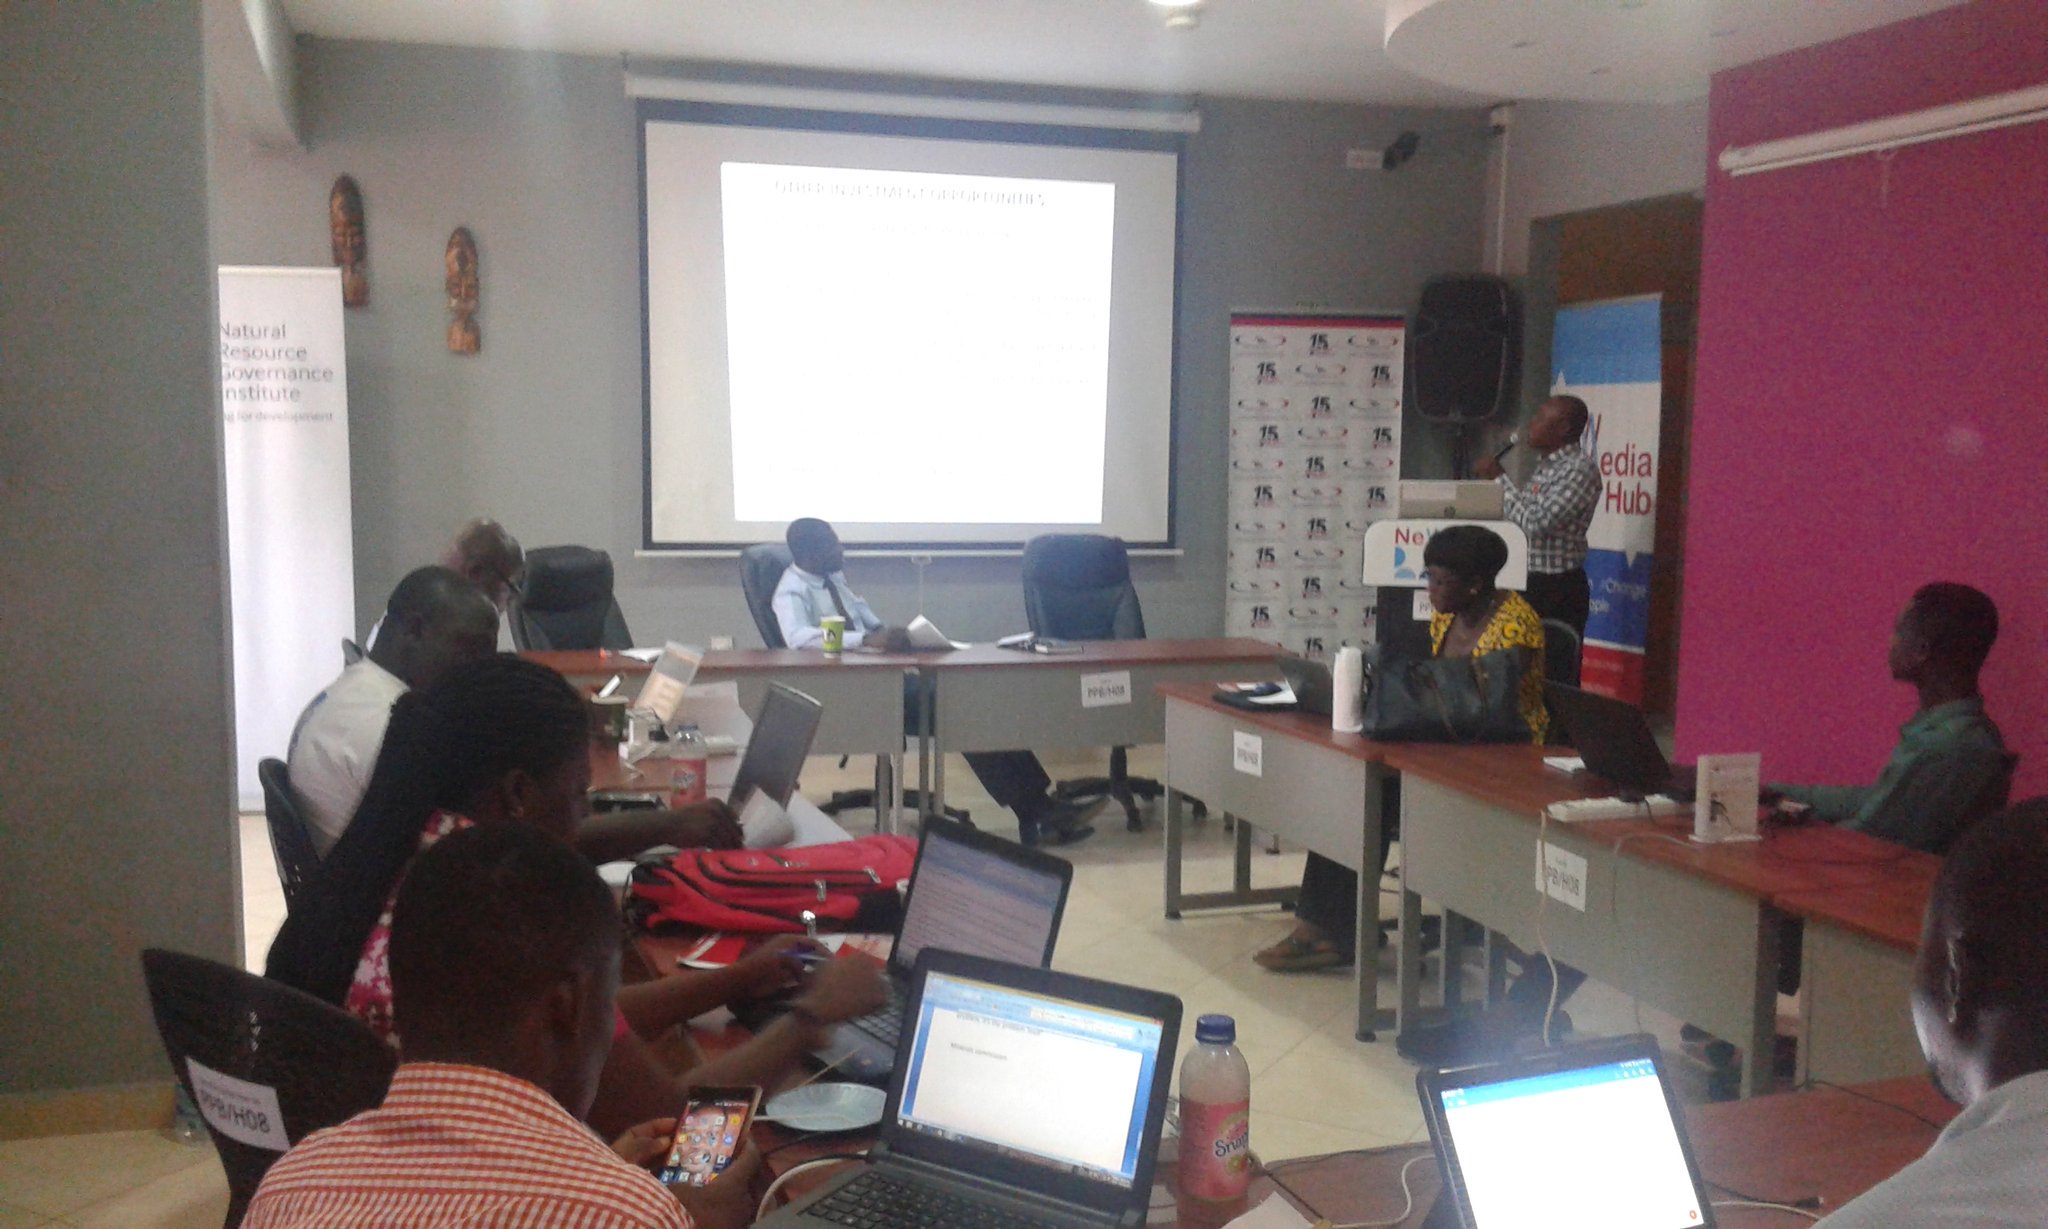 7TH National Course “B” On Oil, Gas and Mining Governance Underway in Accra